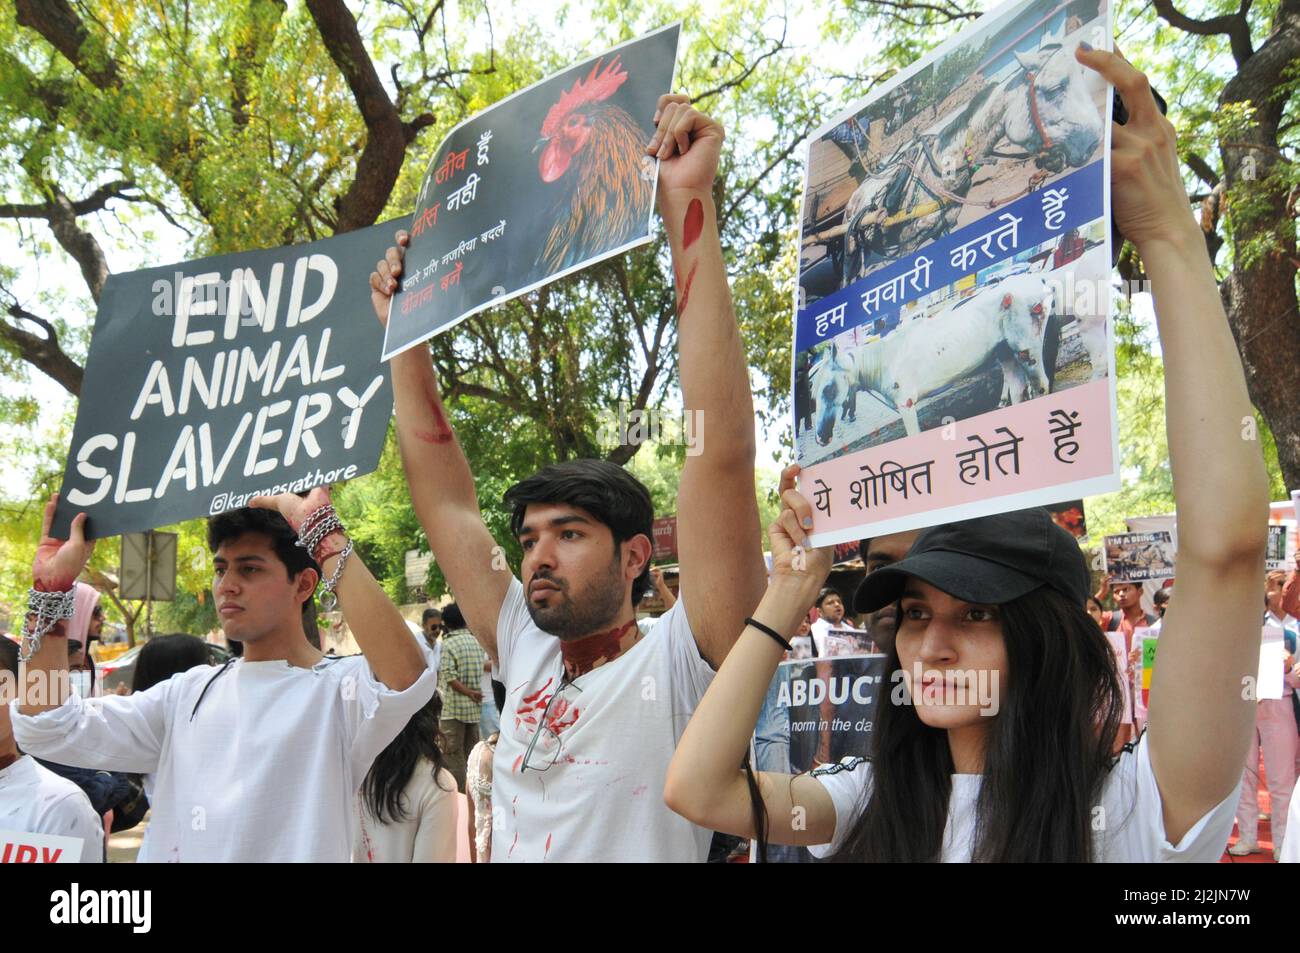 New Delhi, India. 02nd Apr, 2022. Activist of Animal Saver Vegans, unite in grassroots animal liberation protest, holding posters and banners of slogun and animal Pictures, gathered freedom from exploitation and abuse is an inalienable right for both human and non-humans in New Delhi, India on Saturday, April 2, 2022. (Photo by Ravi Batra/Sipa USA) Credit: Sipa USA/Alamy Live News Stock Photo